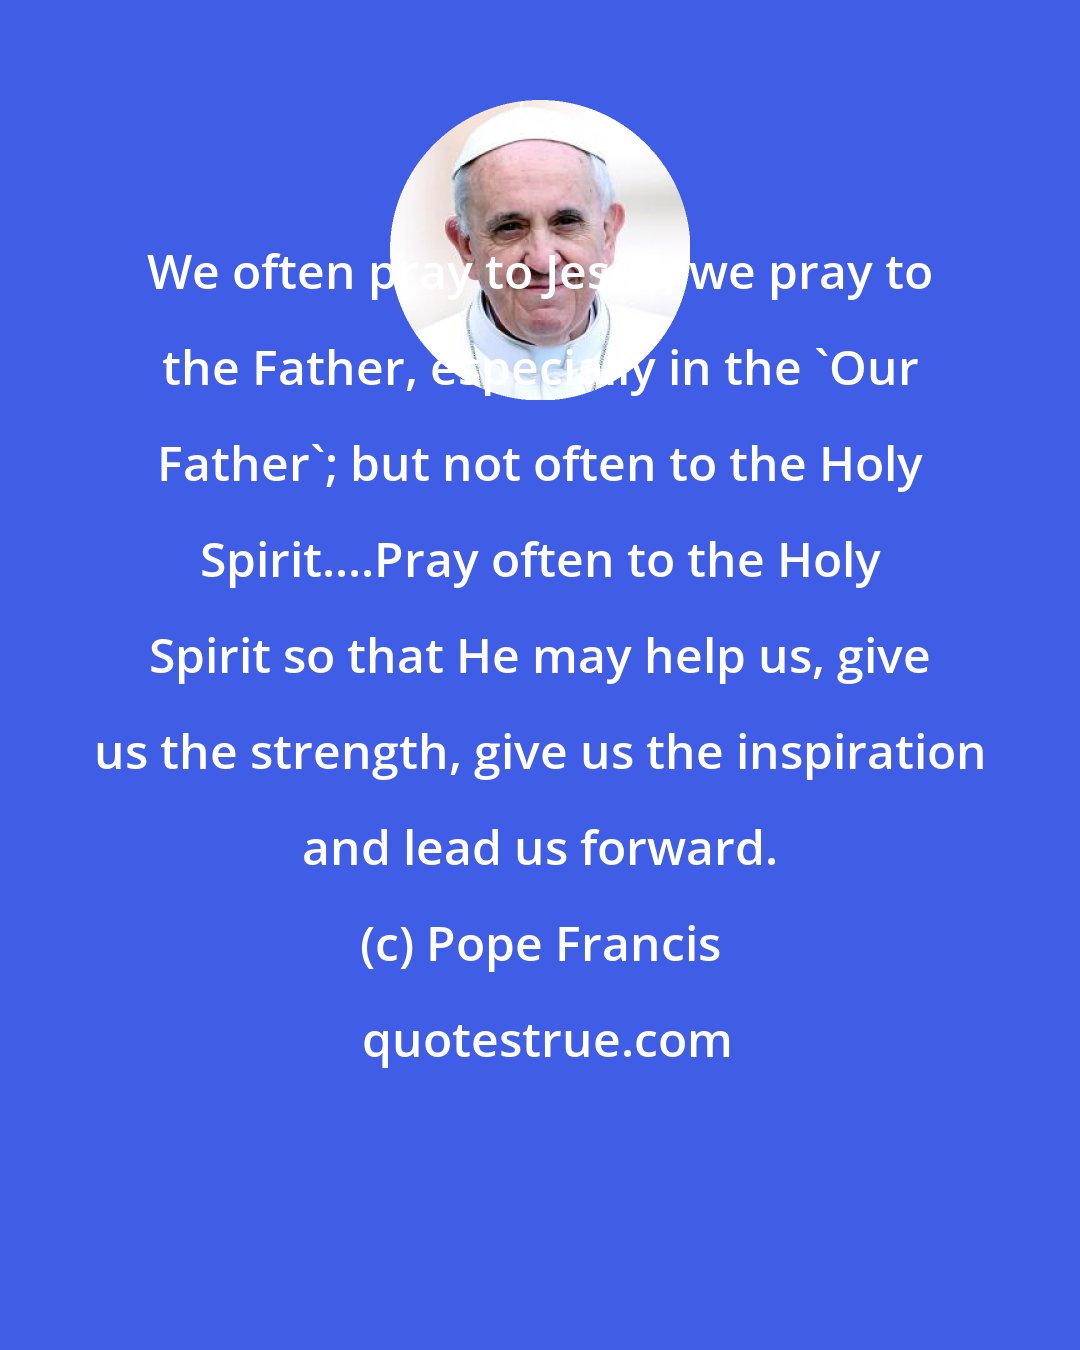 Pope Francis: We often pray to Jesus; we pray to the Father, especially in the 'Our Father'; but not often to the Holy Spirit....Pray often to the Holy Spirit so that He may help us, give us the strength, give us the inspiration and lead us forward.